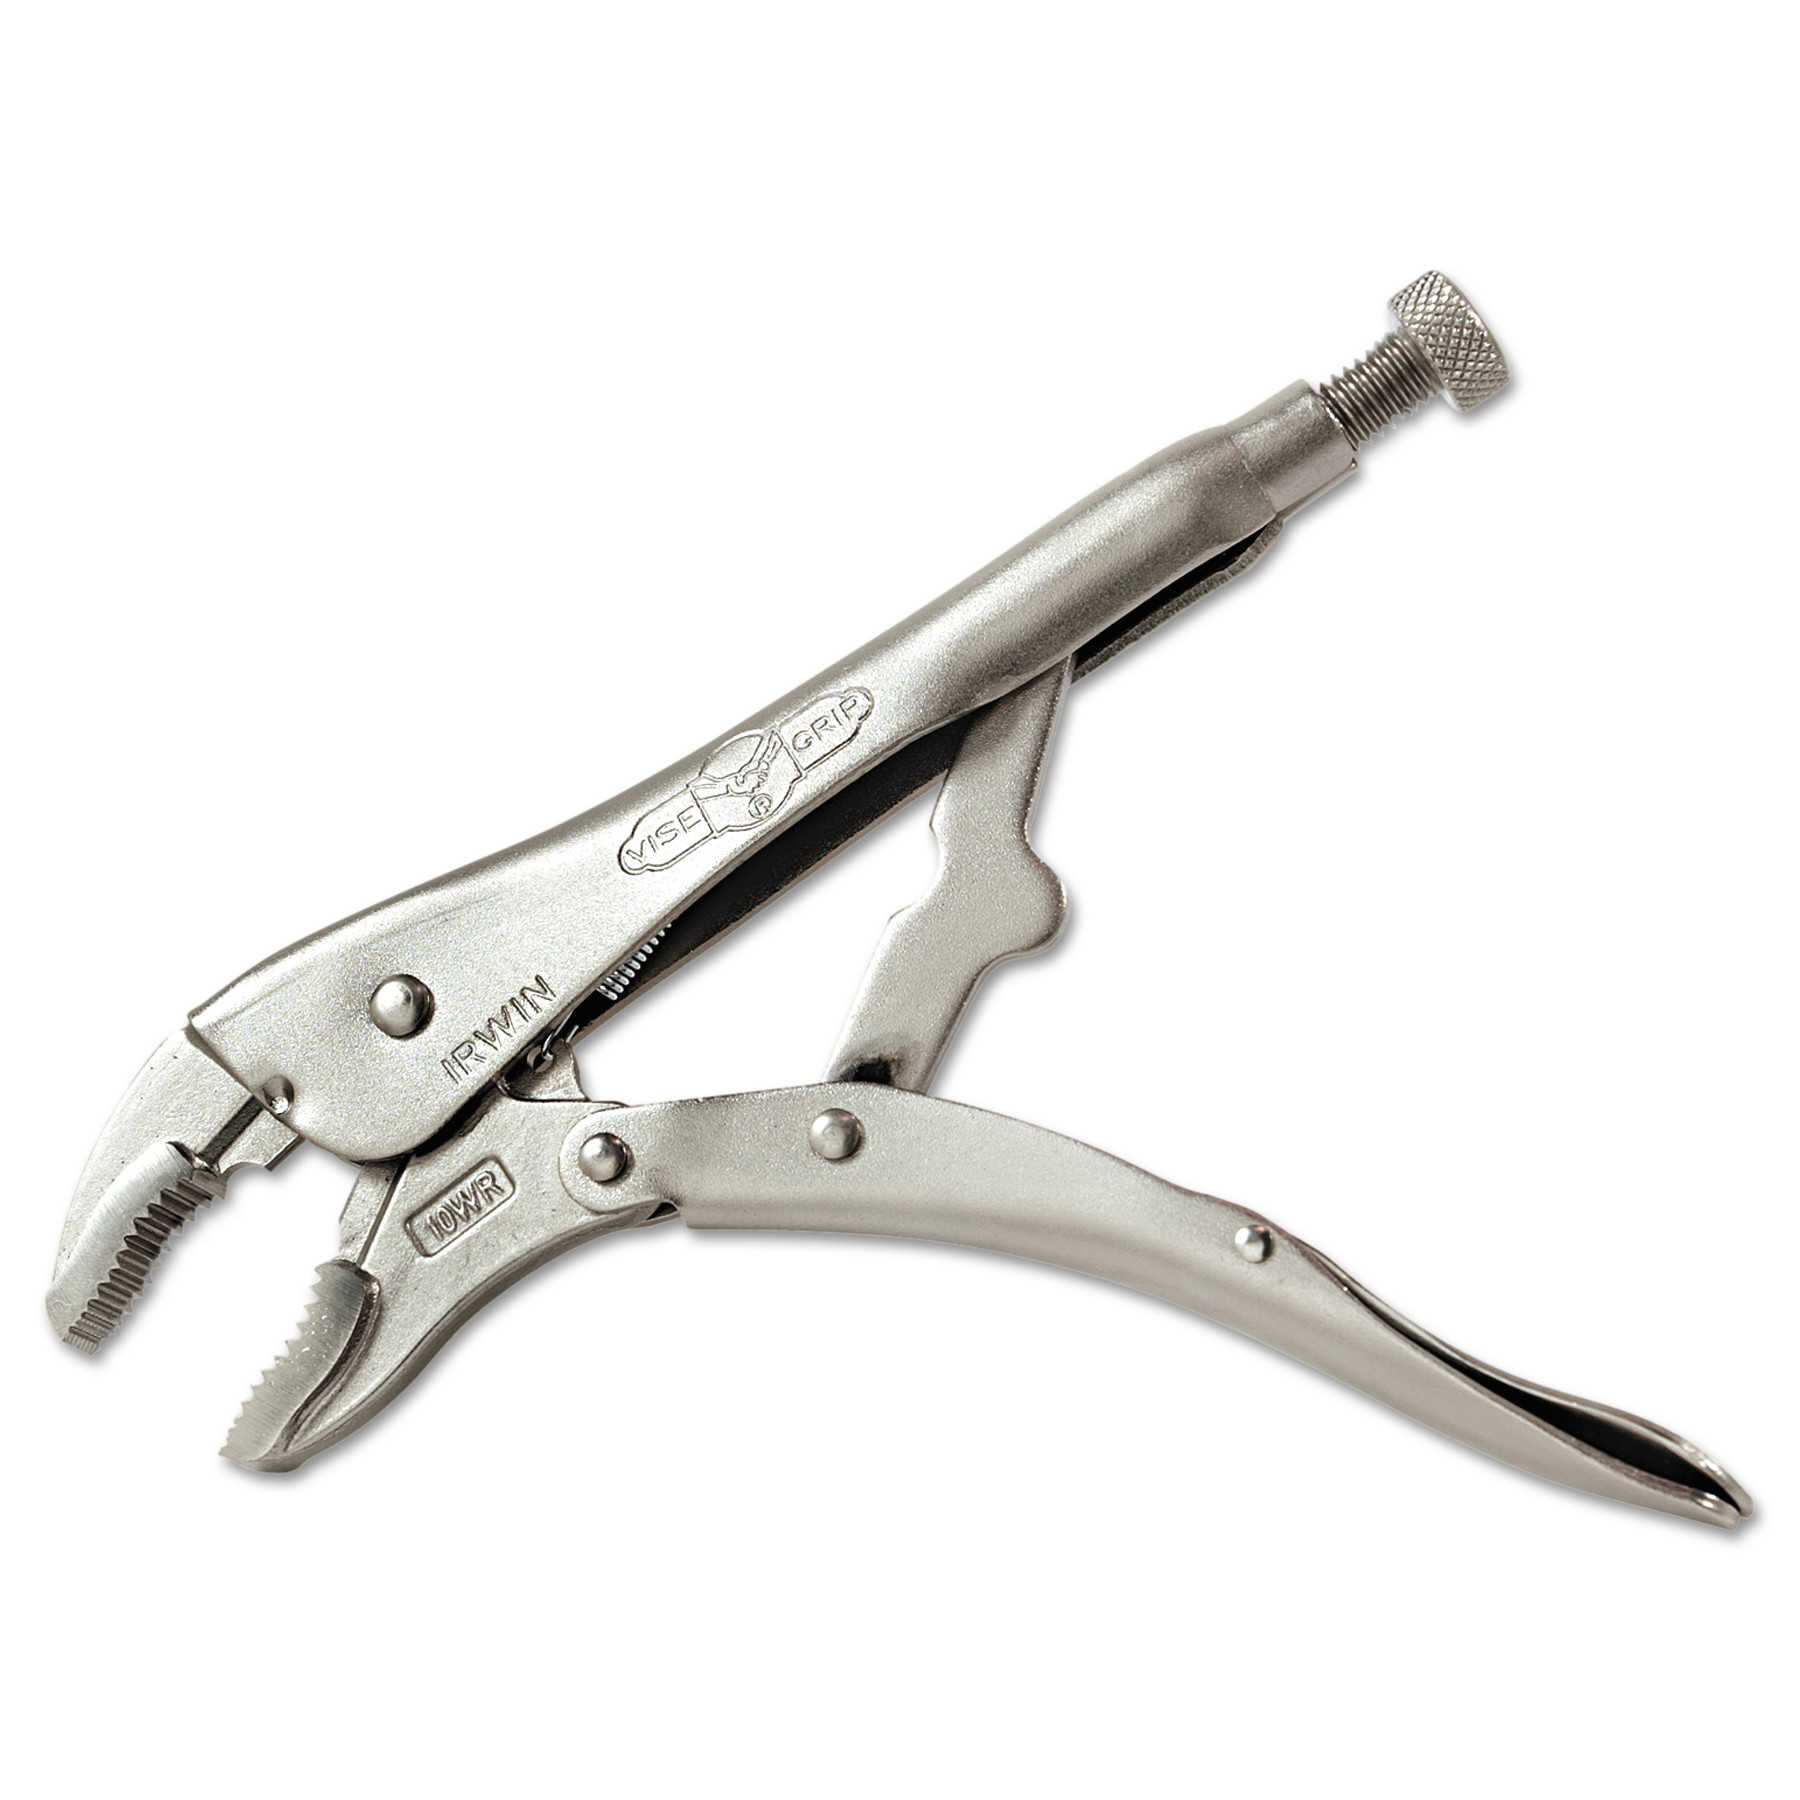 IRWIN Original Curved-Jaw/Cutter Locking Pliers, 10' Tool Length, 1 7/8' Jaw Capacity